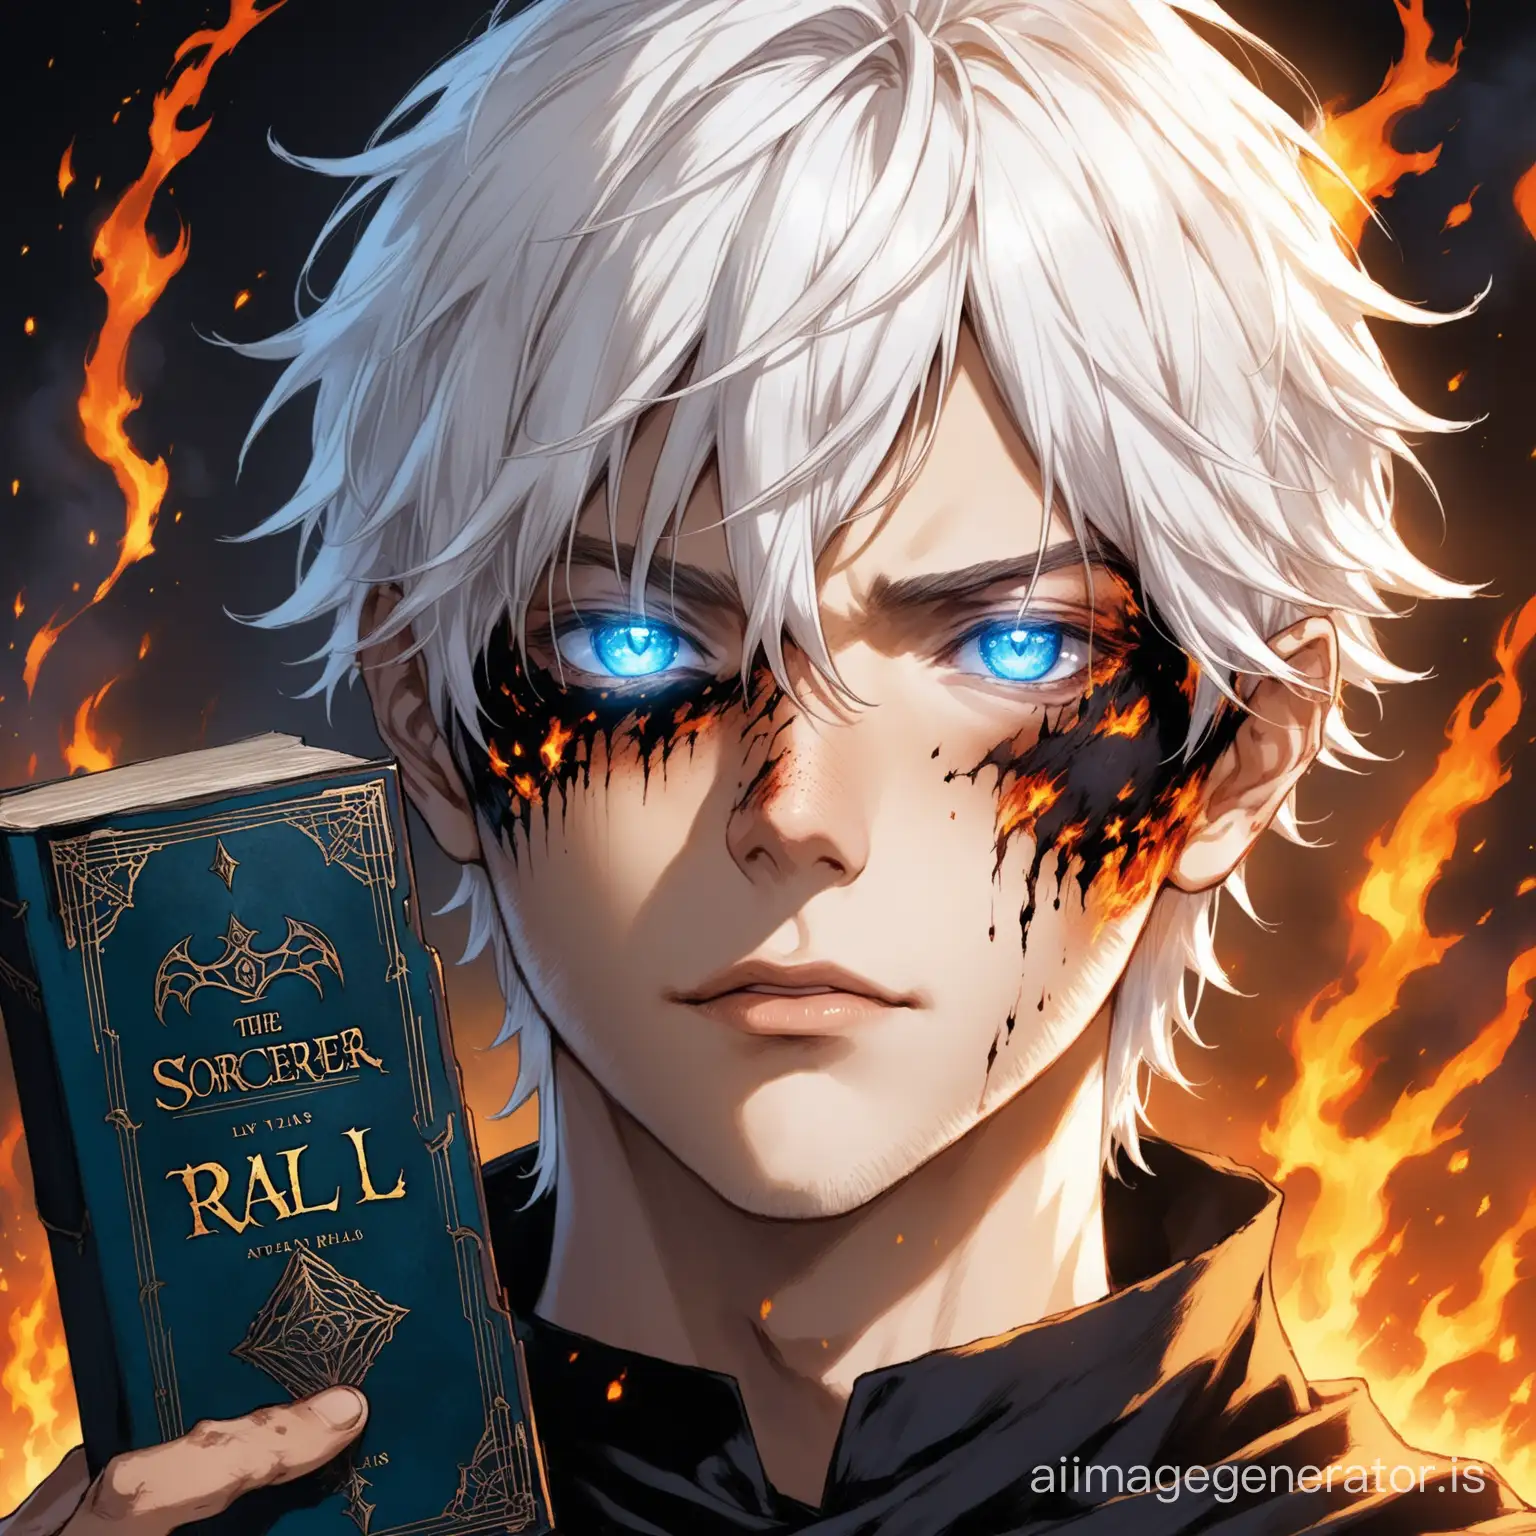 Book cover, Title: New Ral. On the cover is depicted a sorcerer guy, with a burnt face, white hair, blue eyes, thin lips. 20 years old. High quality, attention to small details, attention to details